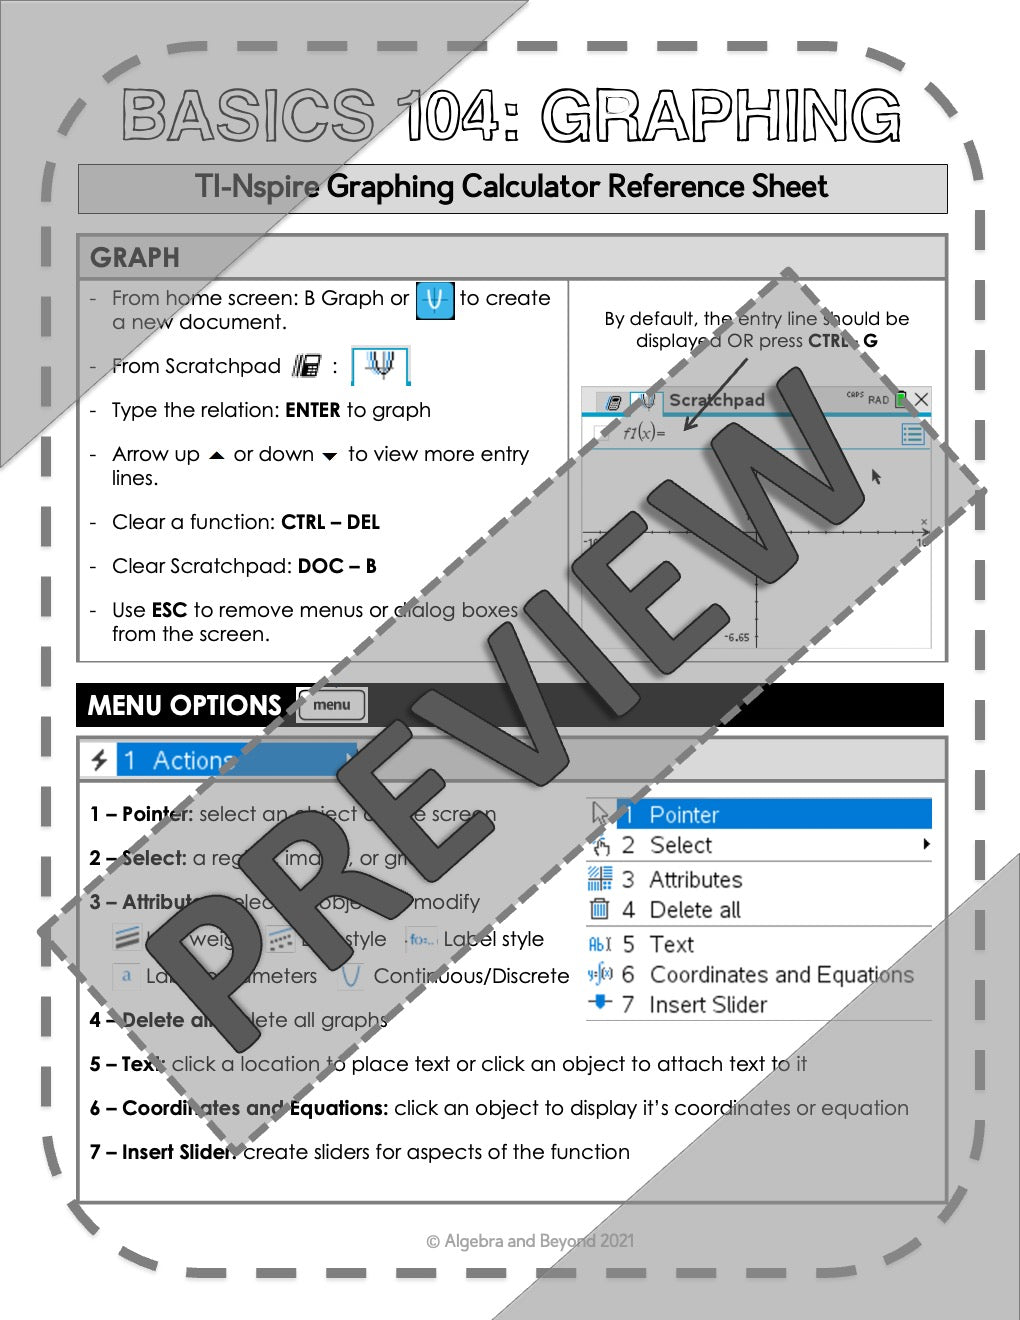 Graphing Functions - TI-Nspire Graphing Calculator Reference Sheets